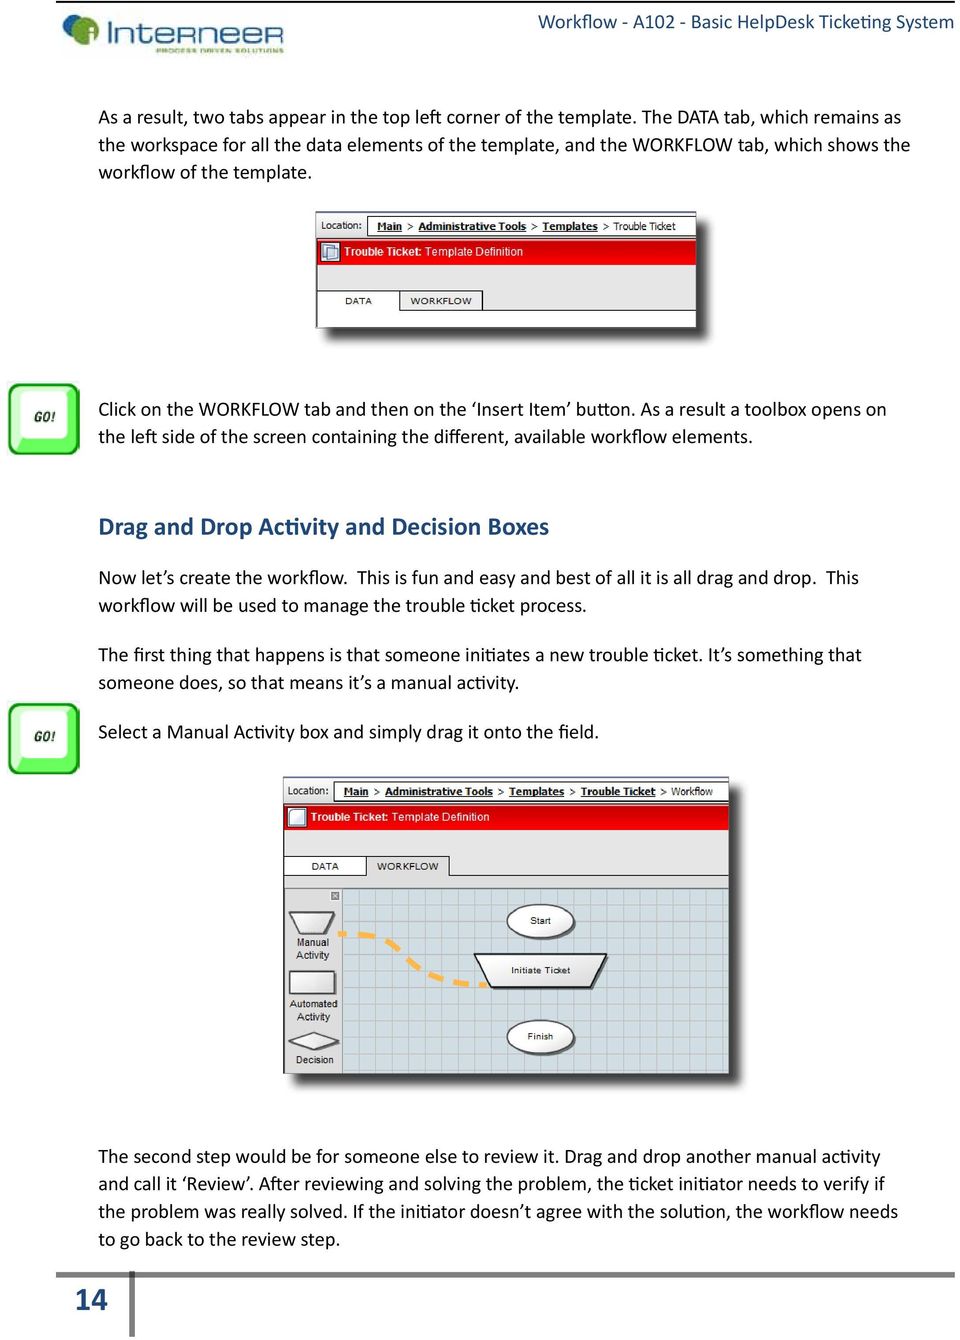 Click on the WORKFLOW tab and then on the Insert Item button. As a result a toolbox opens on the left side of the screen containing the different, available workflow elements.